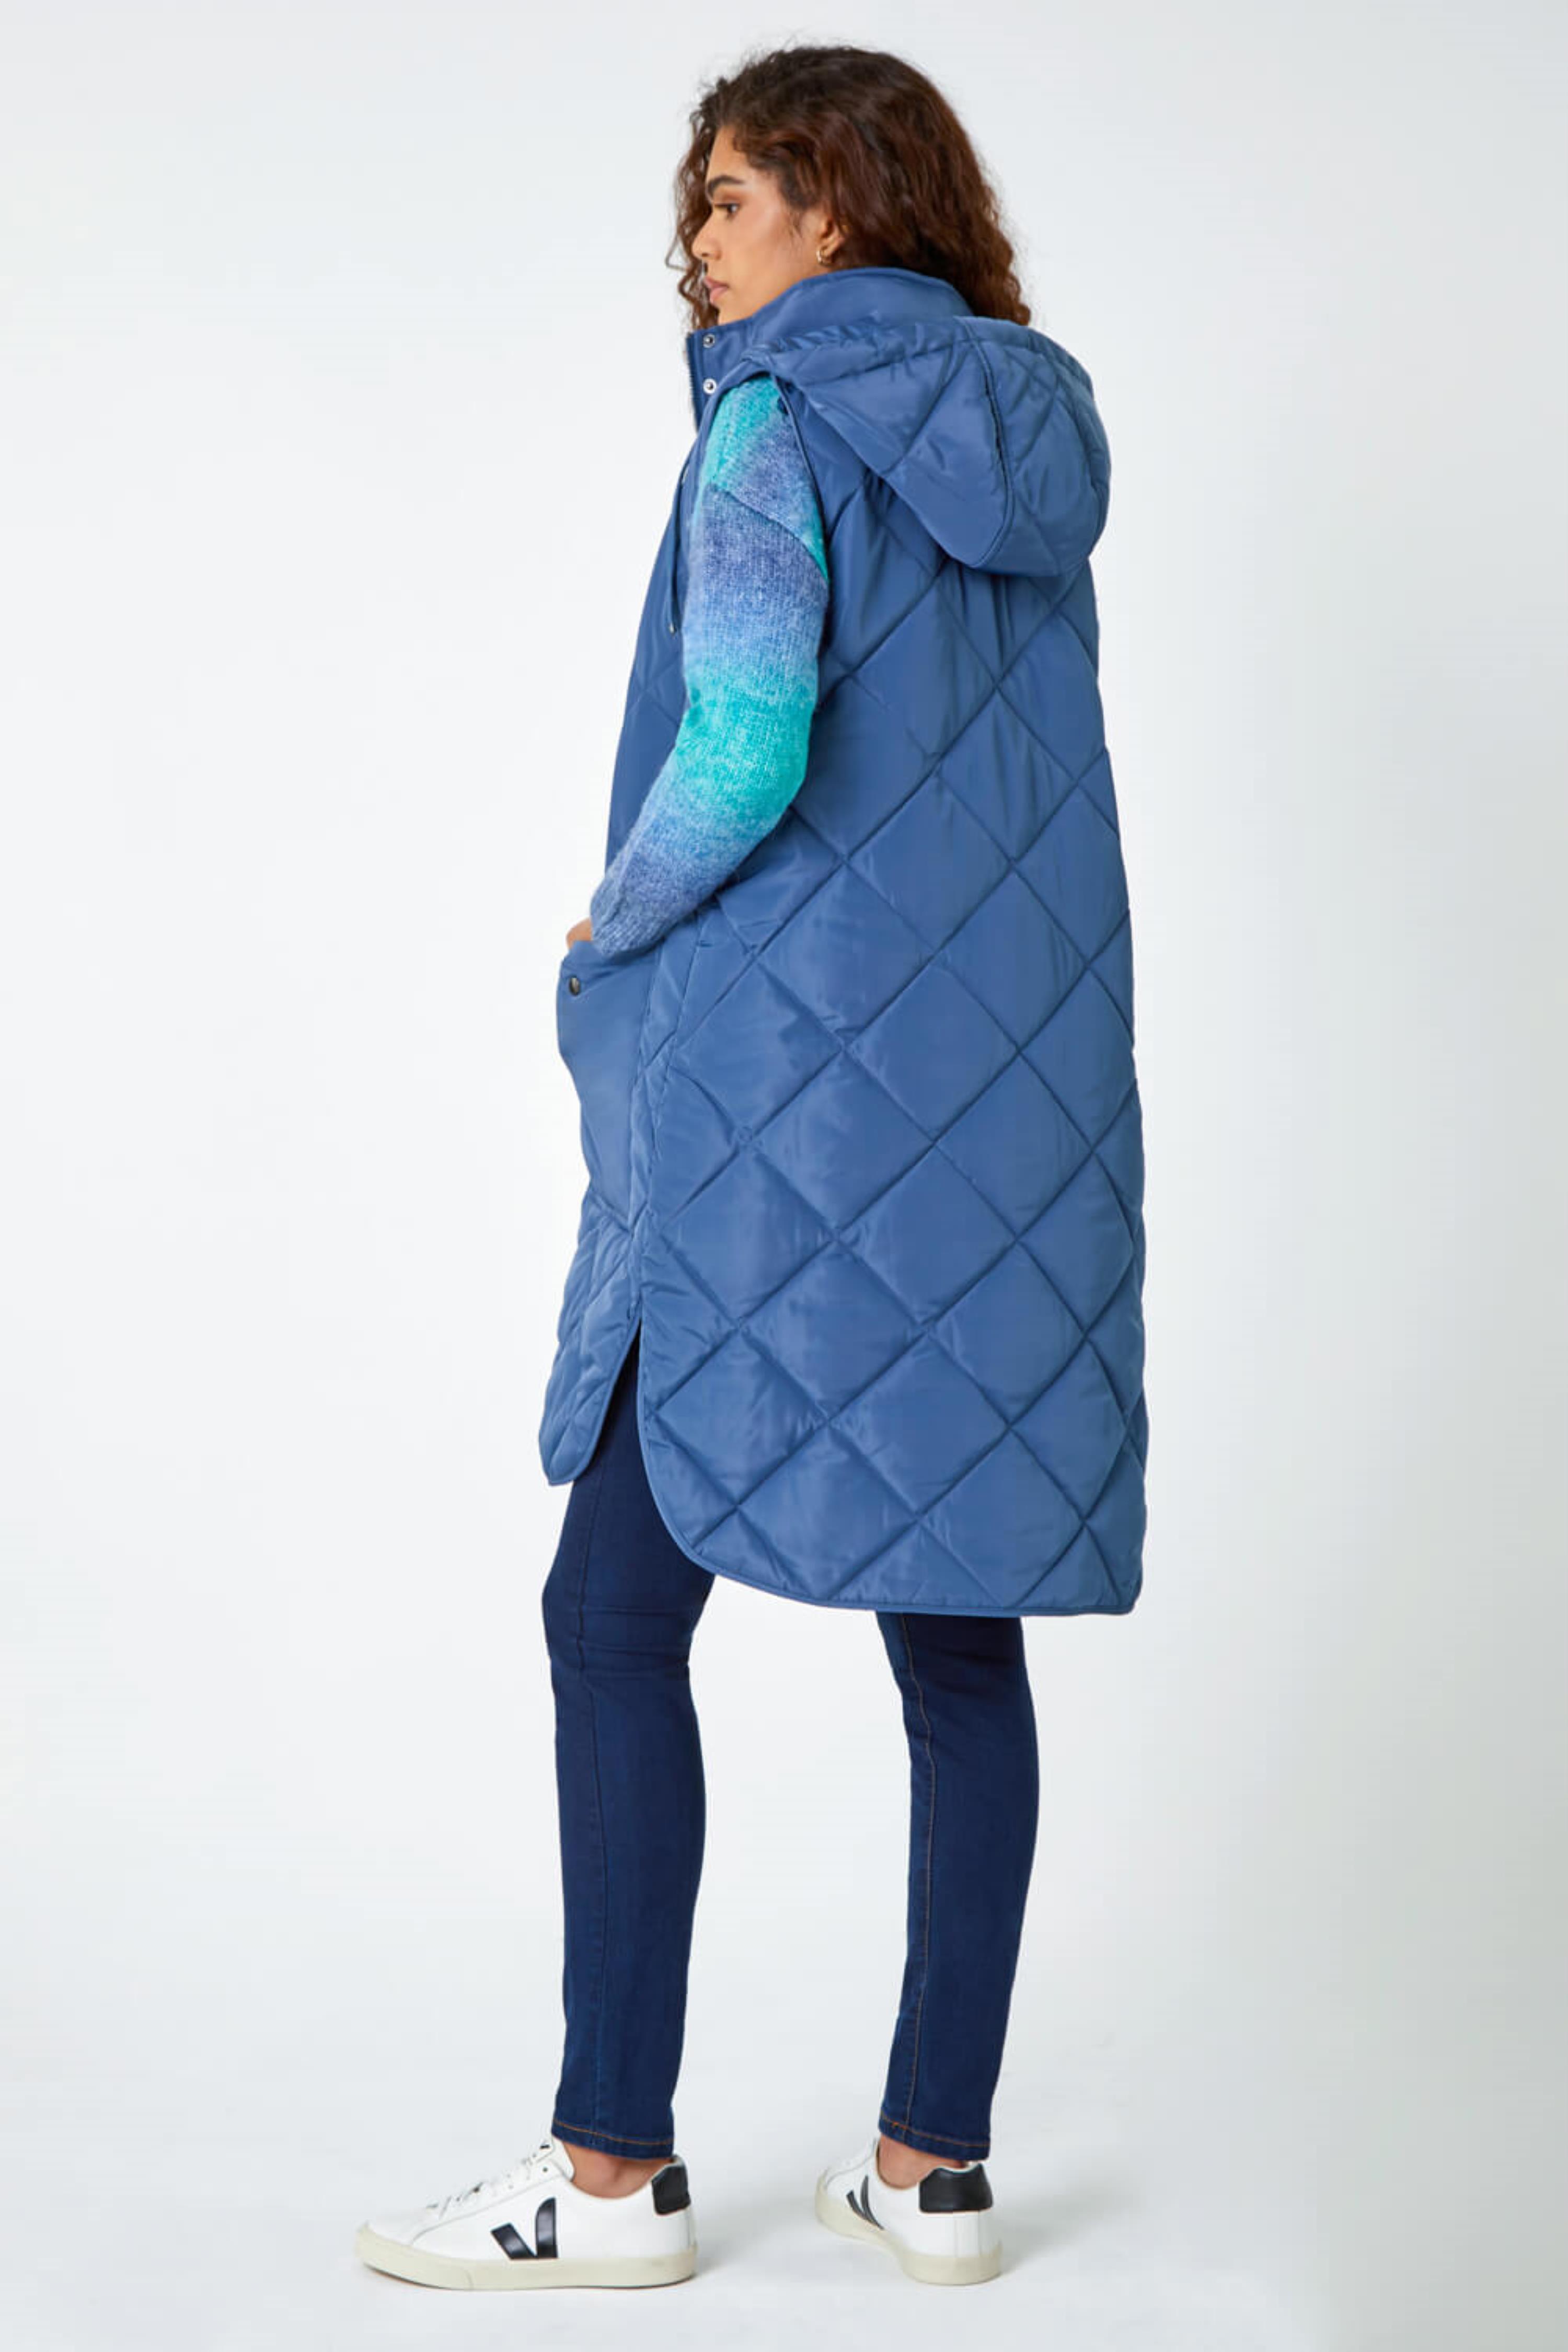 Steel Blue Diamond Quilted Longline Gilet, Image 2 of 4